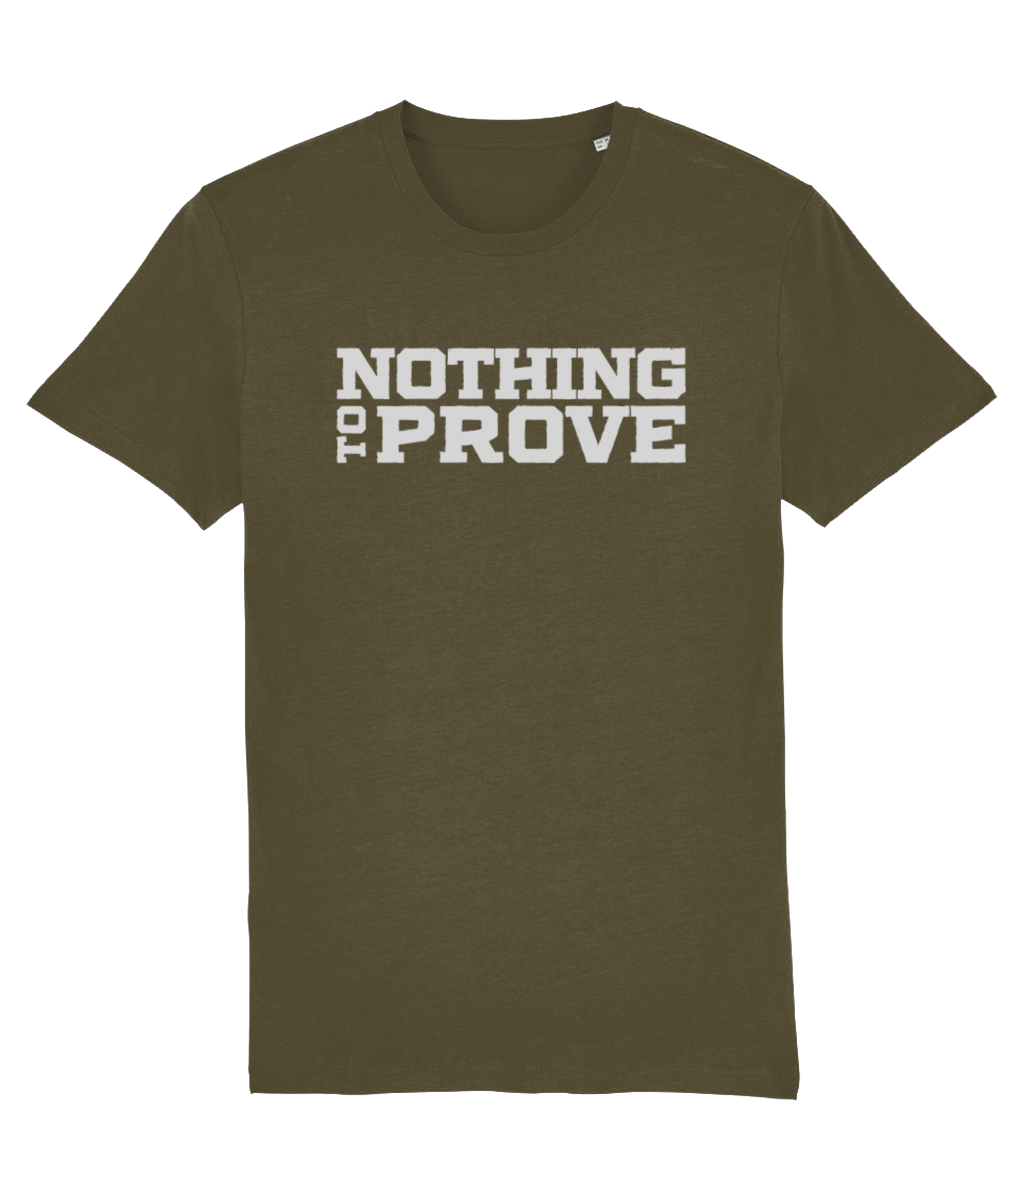 Khaki variant of the Nothing to Prove T-Shirt